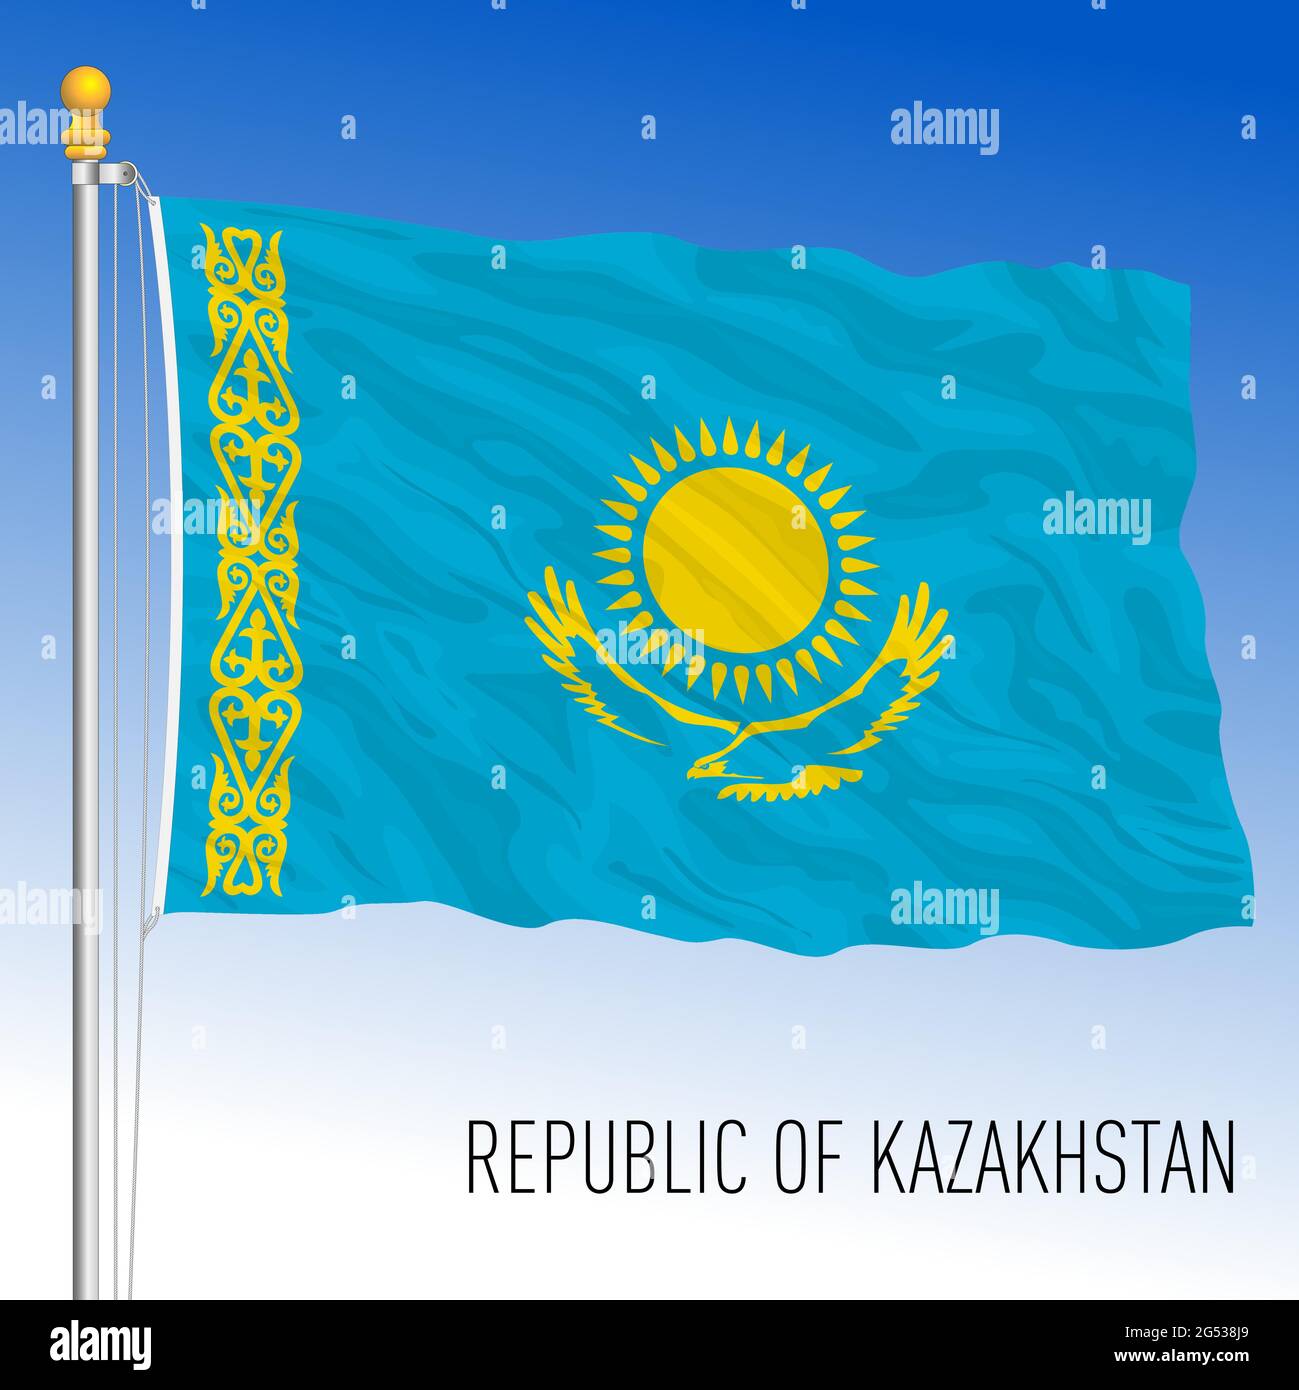 Kazakhstan official national flag, asiatic country, vector illustration